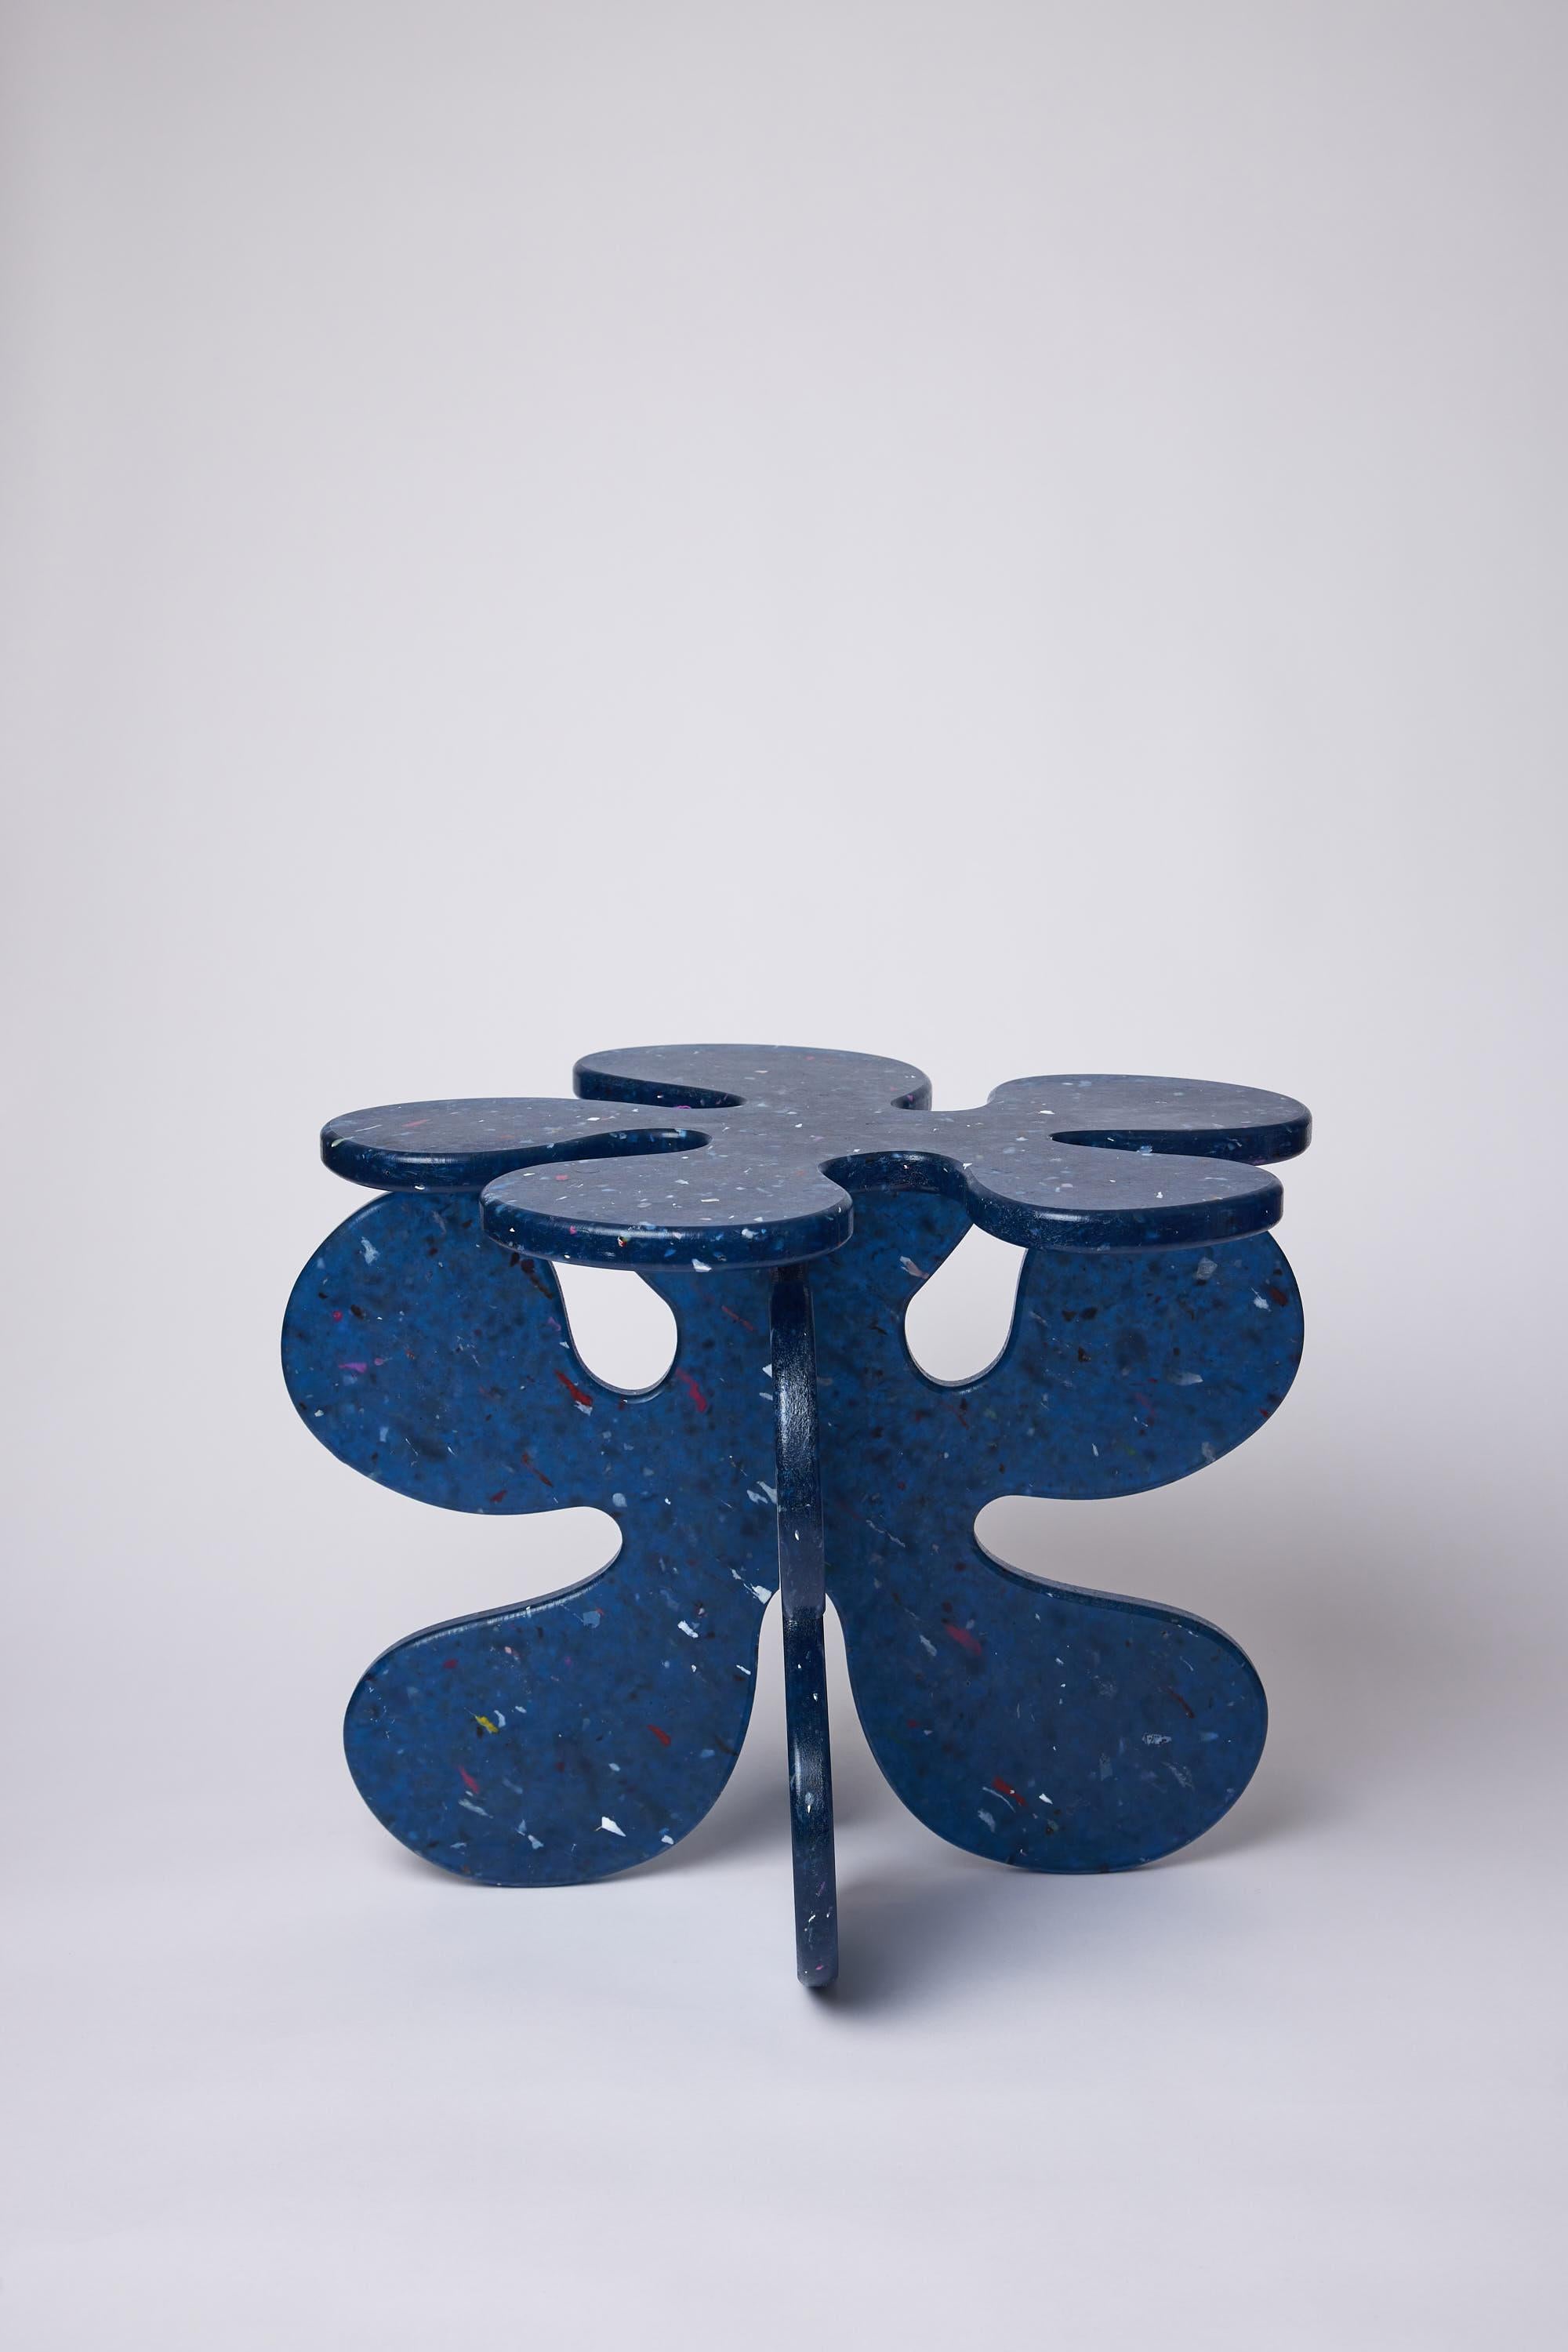 squares & things' signature Flower Table design gets reimagined in 100% recycled plastics. Made entirely from recycled plastic packaging and ocean waste, the table can be recycled itself, becoming part of the circular economy. Pictured is the table